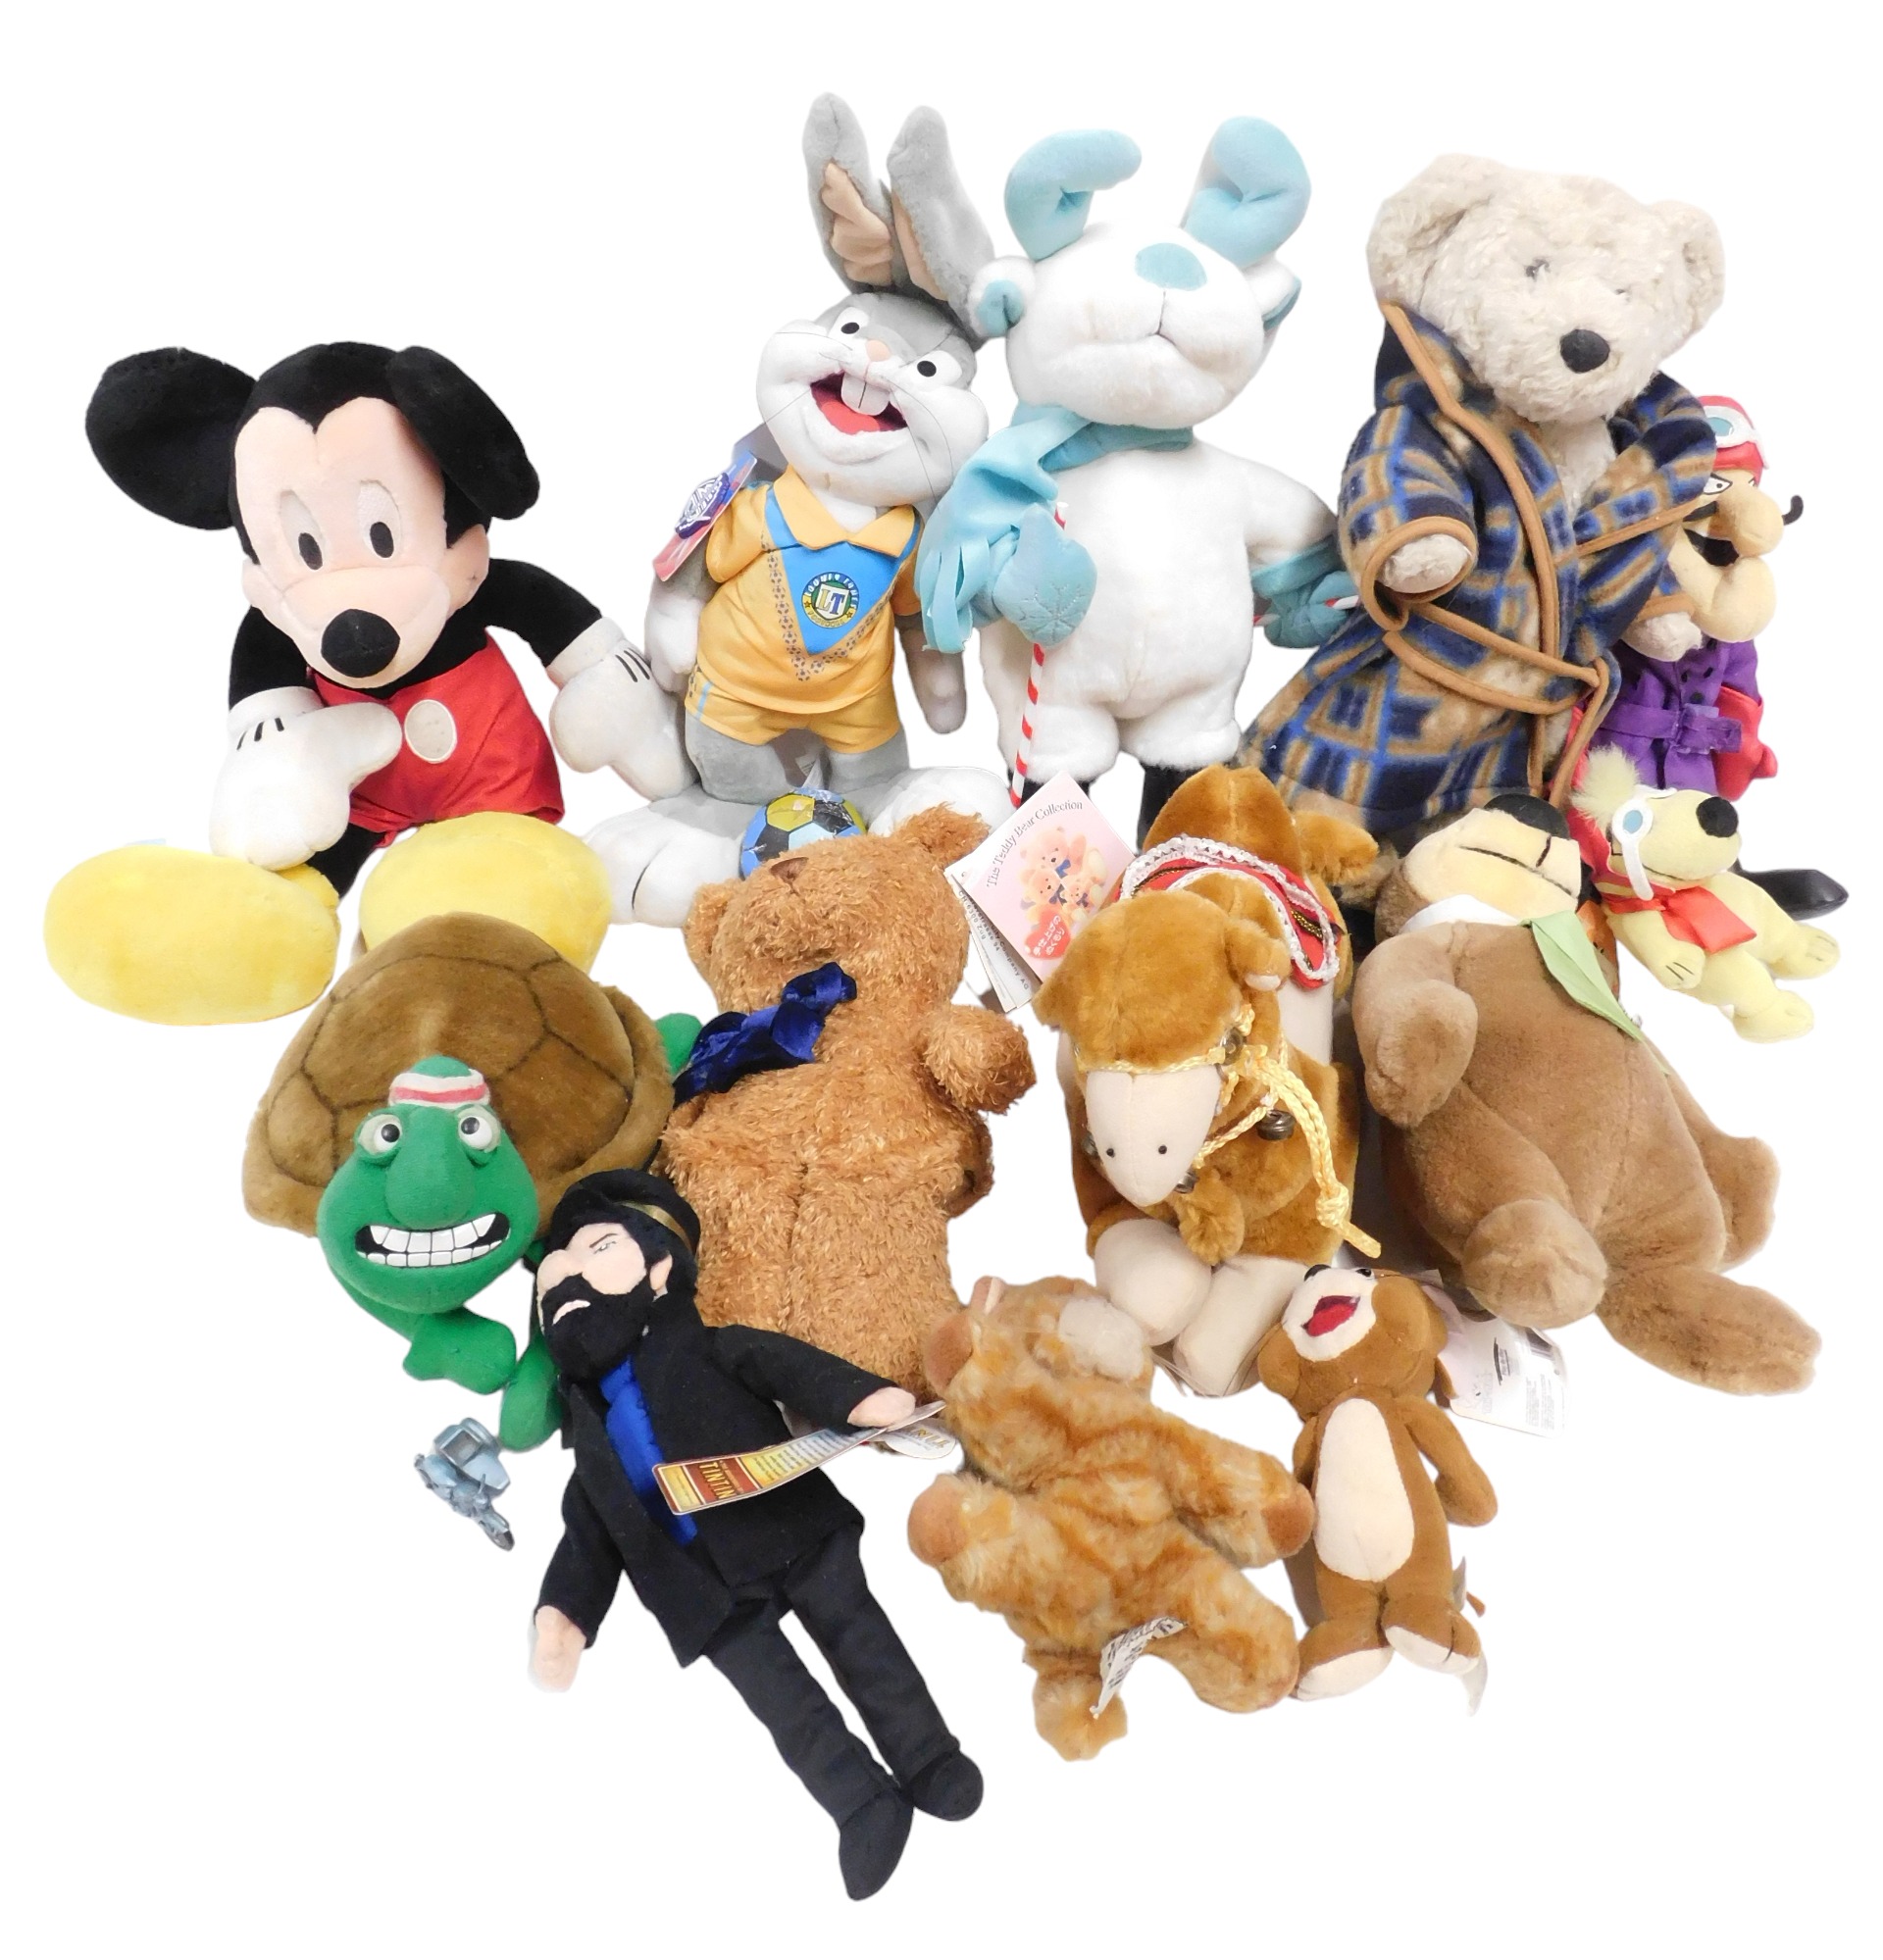 Plush toys, including Dick Dastardly and Muttley, Bugs Bunny, Captain Haddock, etc. (1 box)